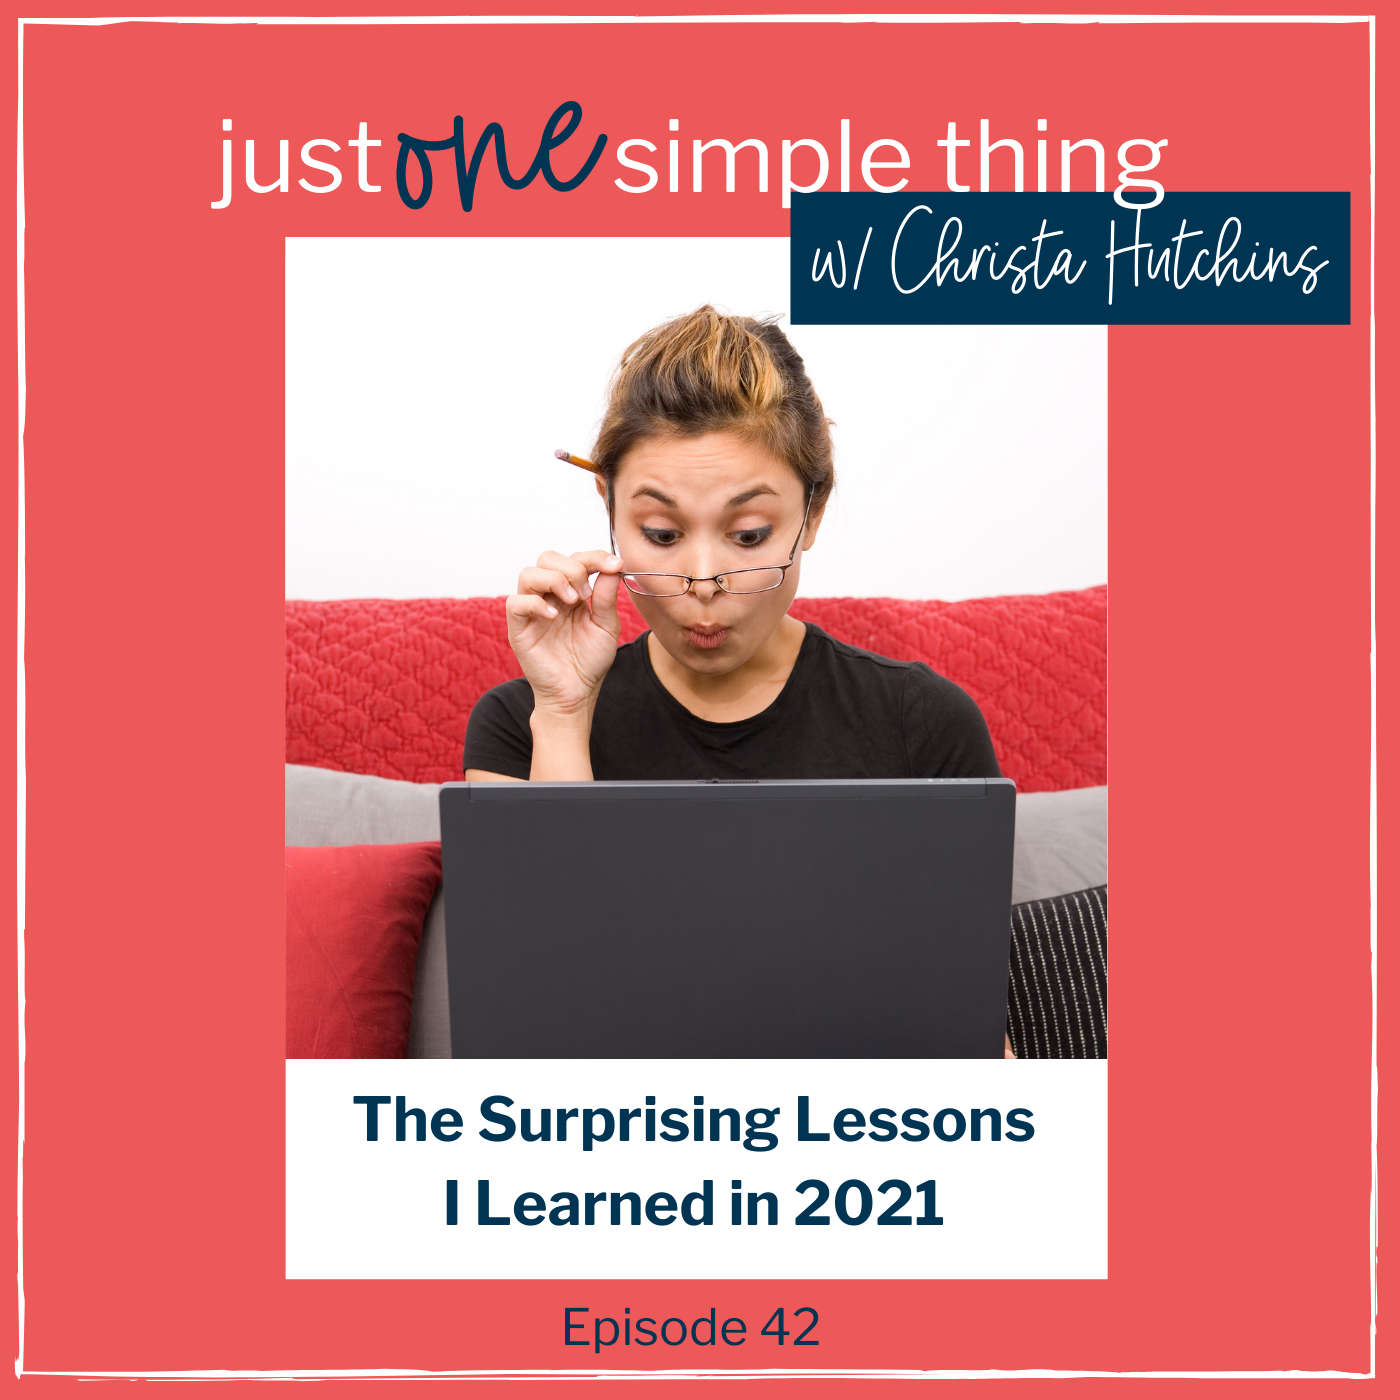 The Surprising Lessons I Learned in 2021